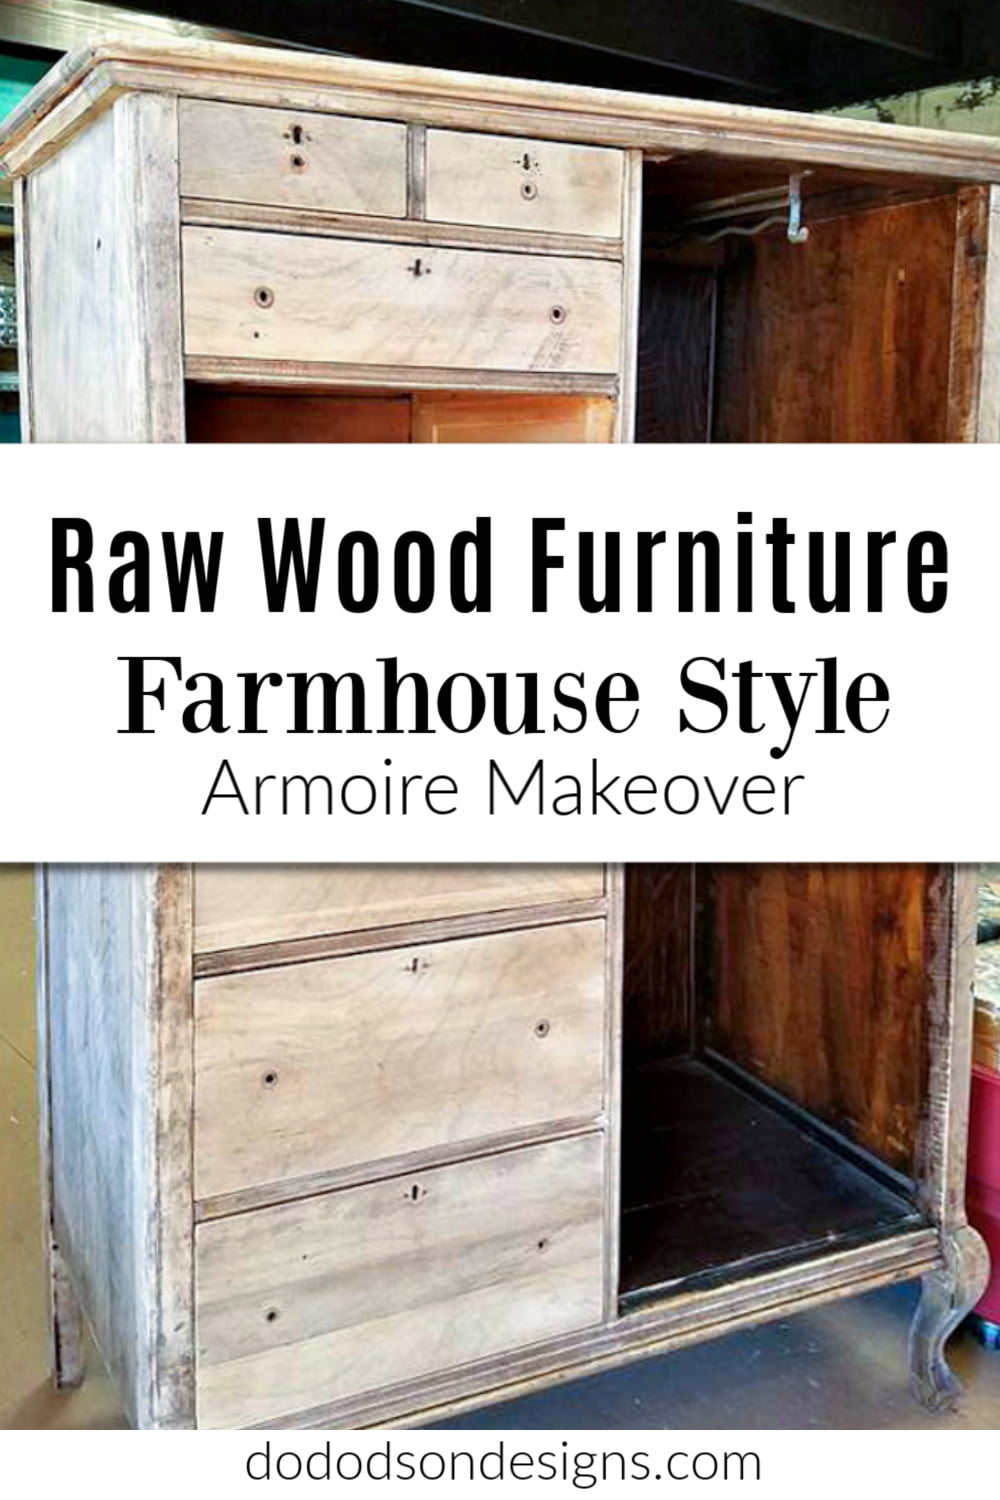 Raw Wood Furniture Farmhouse Style Armoire Makeover